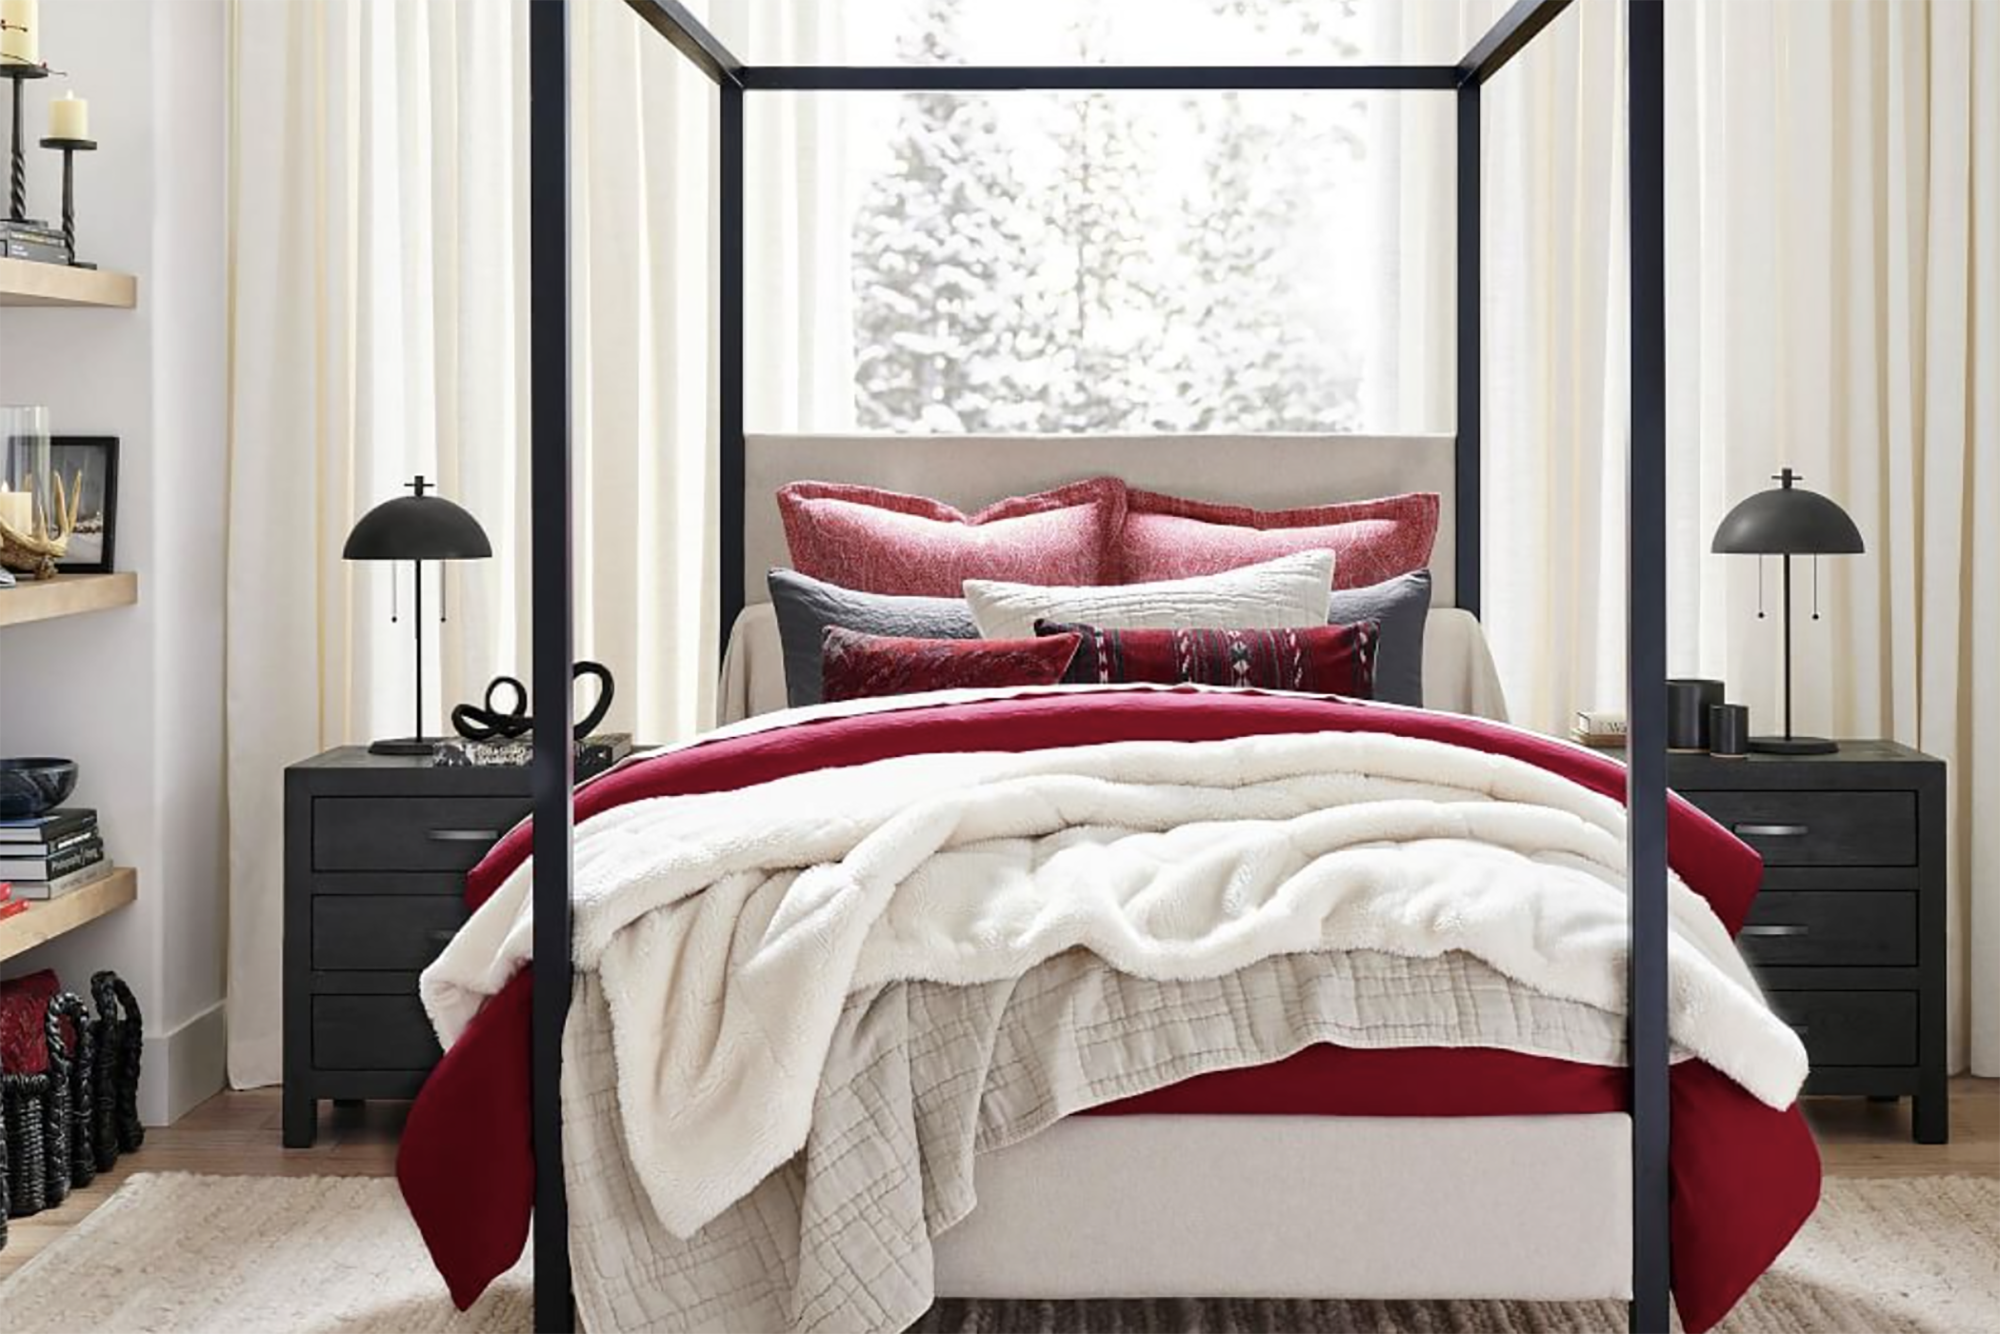 A red and white bedding set on a four poster bed 